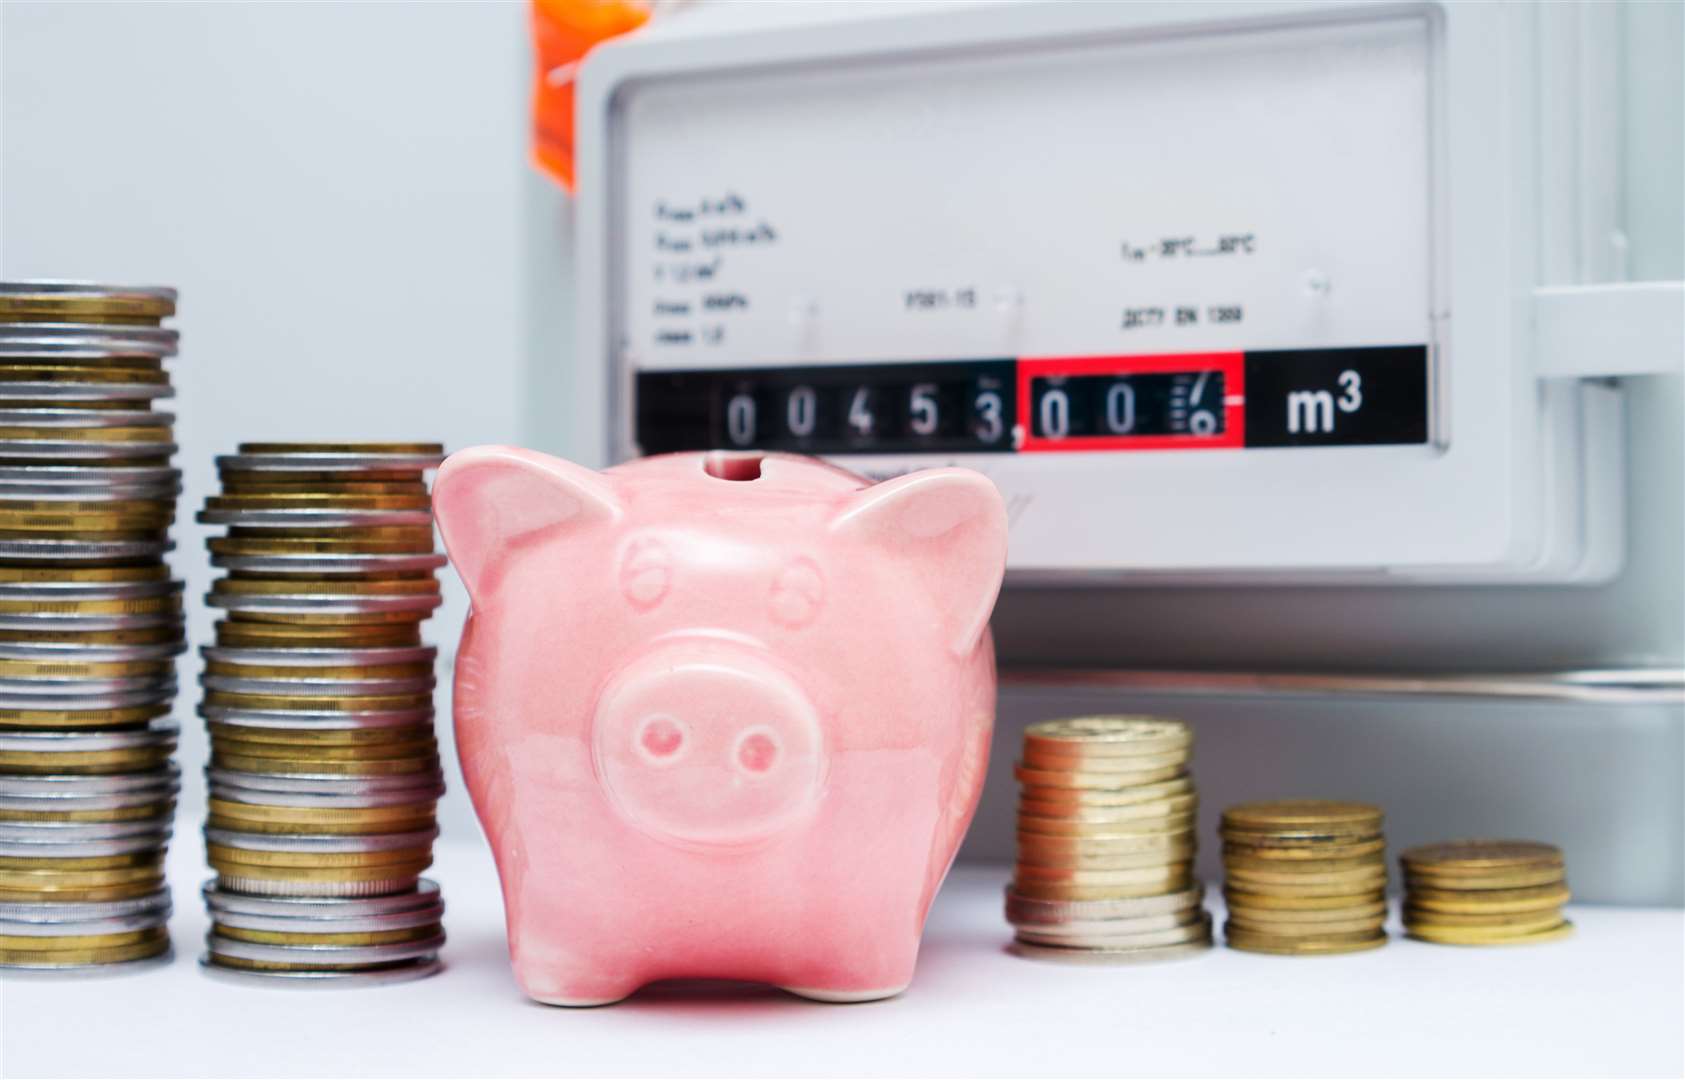 Piggy bank with coins near the natural gas meter at home. Energy saving or cost of natural gas for heating a house concept image. Symbolic image of a payment for heating in winter. Selective focus